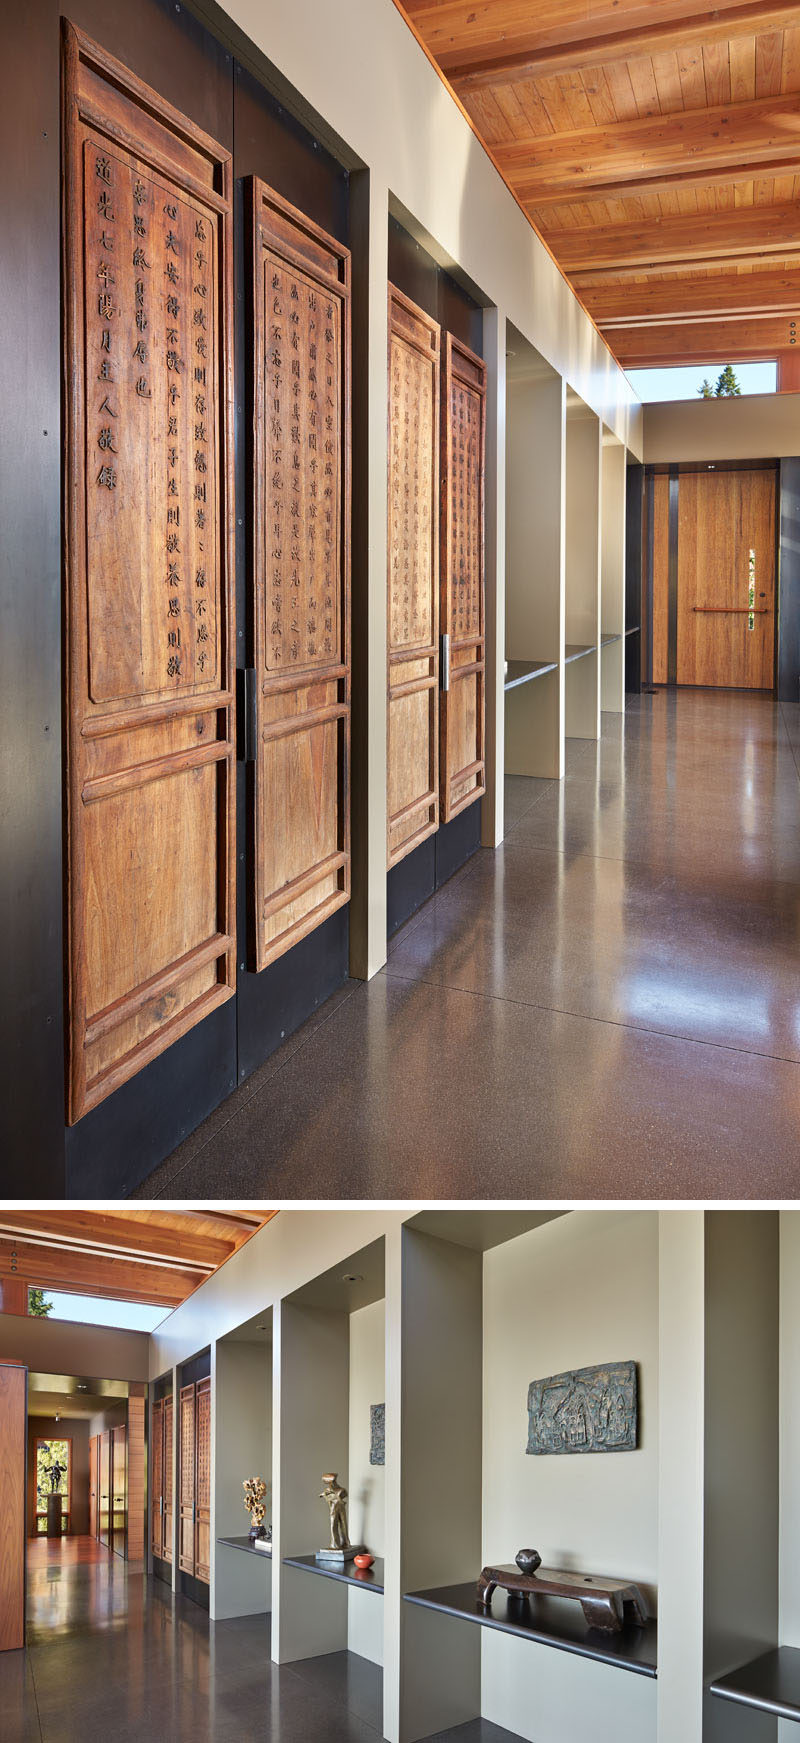 In this hallway, there's display shelving for the home owners art collection, and a set of antique Chinese wood panels have been inset into blackened-steel framing. #Hallway #InteriorDesign